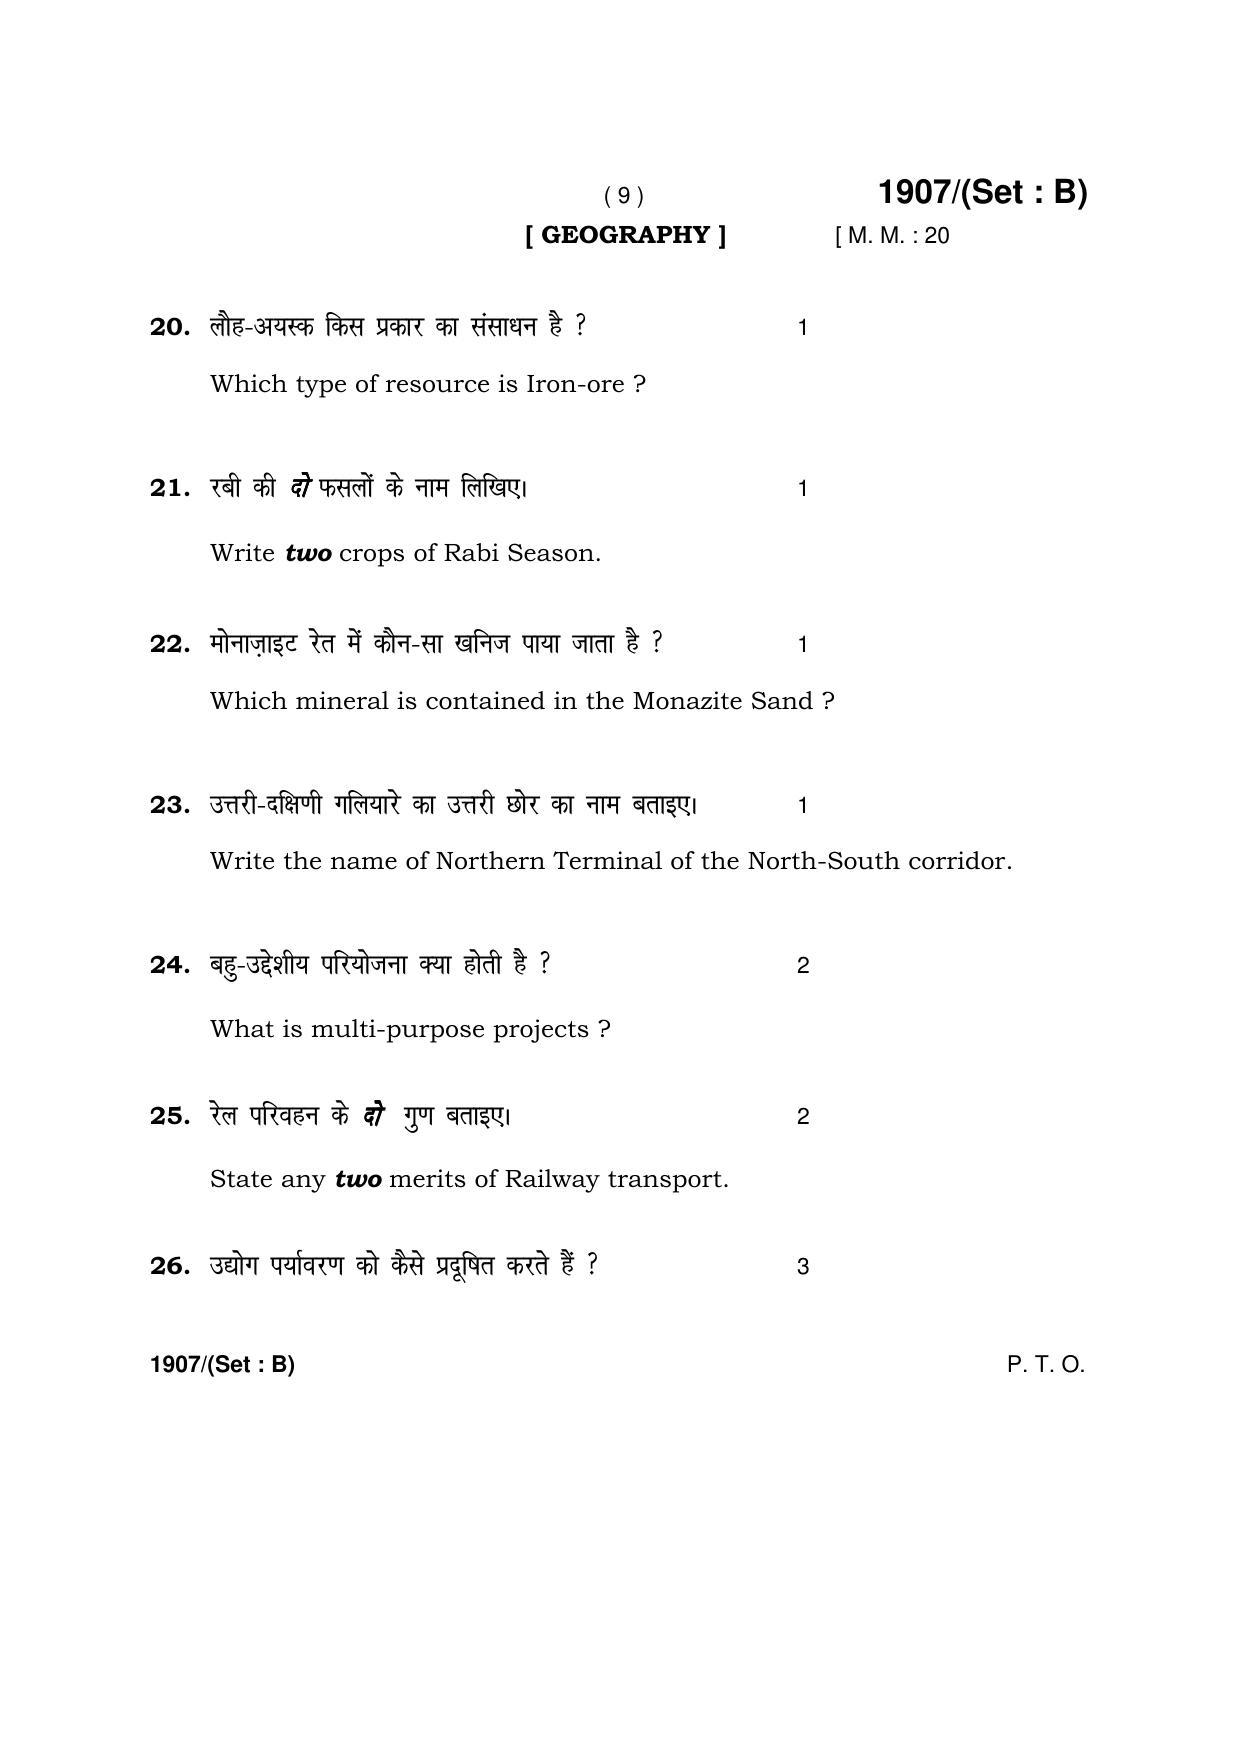 Haryana Board HBSE Class 10 Social Science -B 2017 Question Paper - Page 9